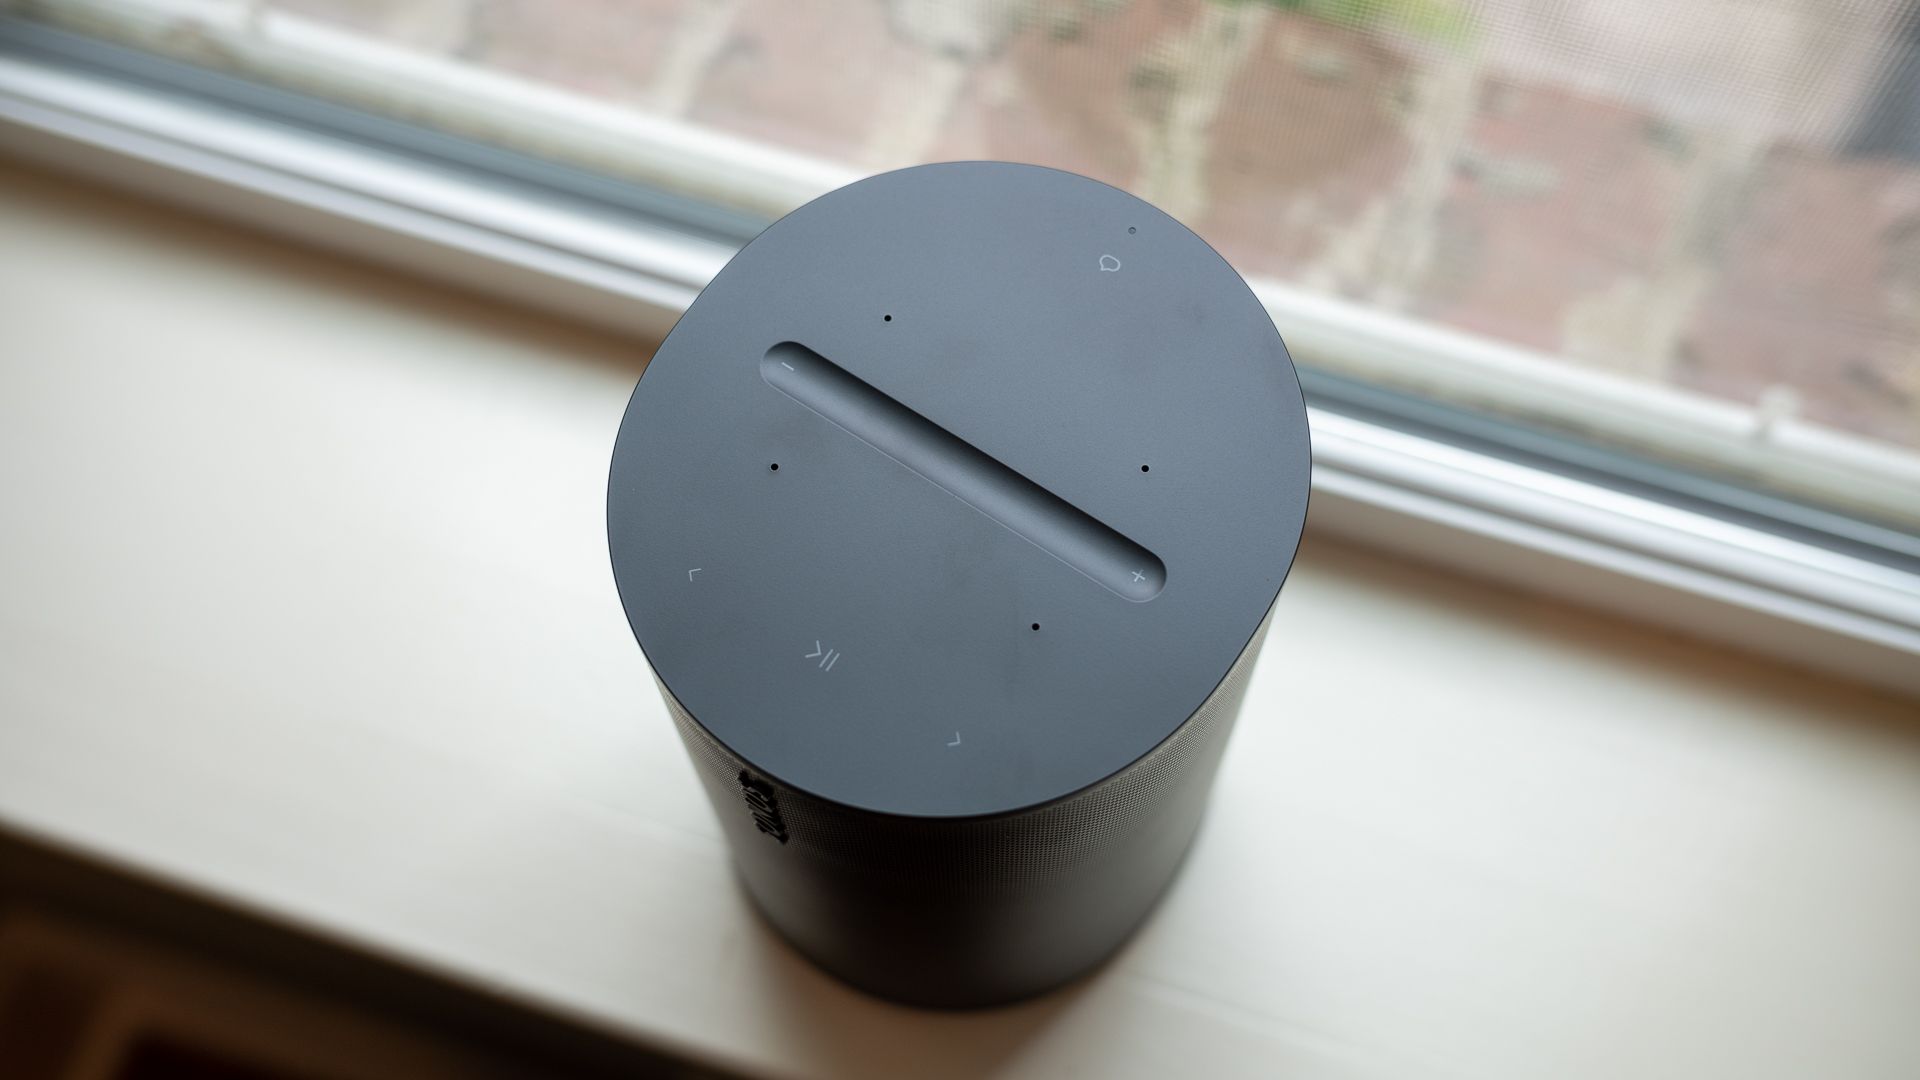 Controls and buttons on the top of the Sonos Era 100